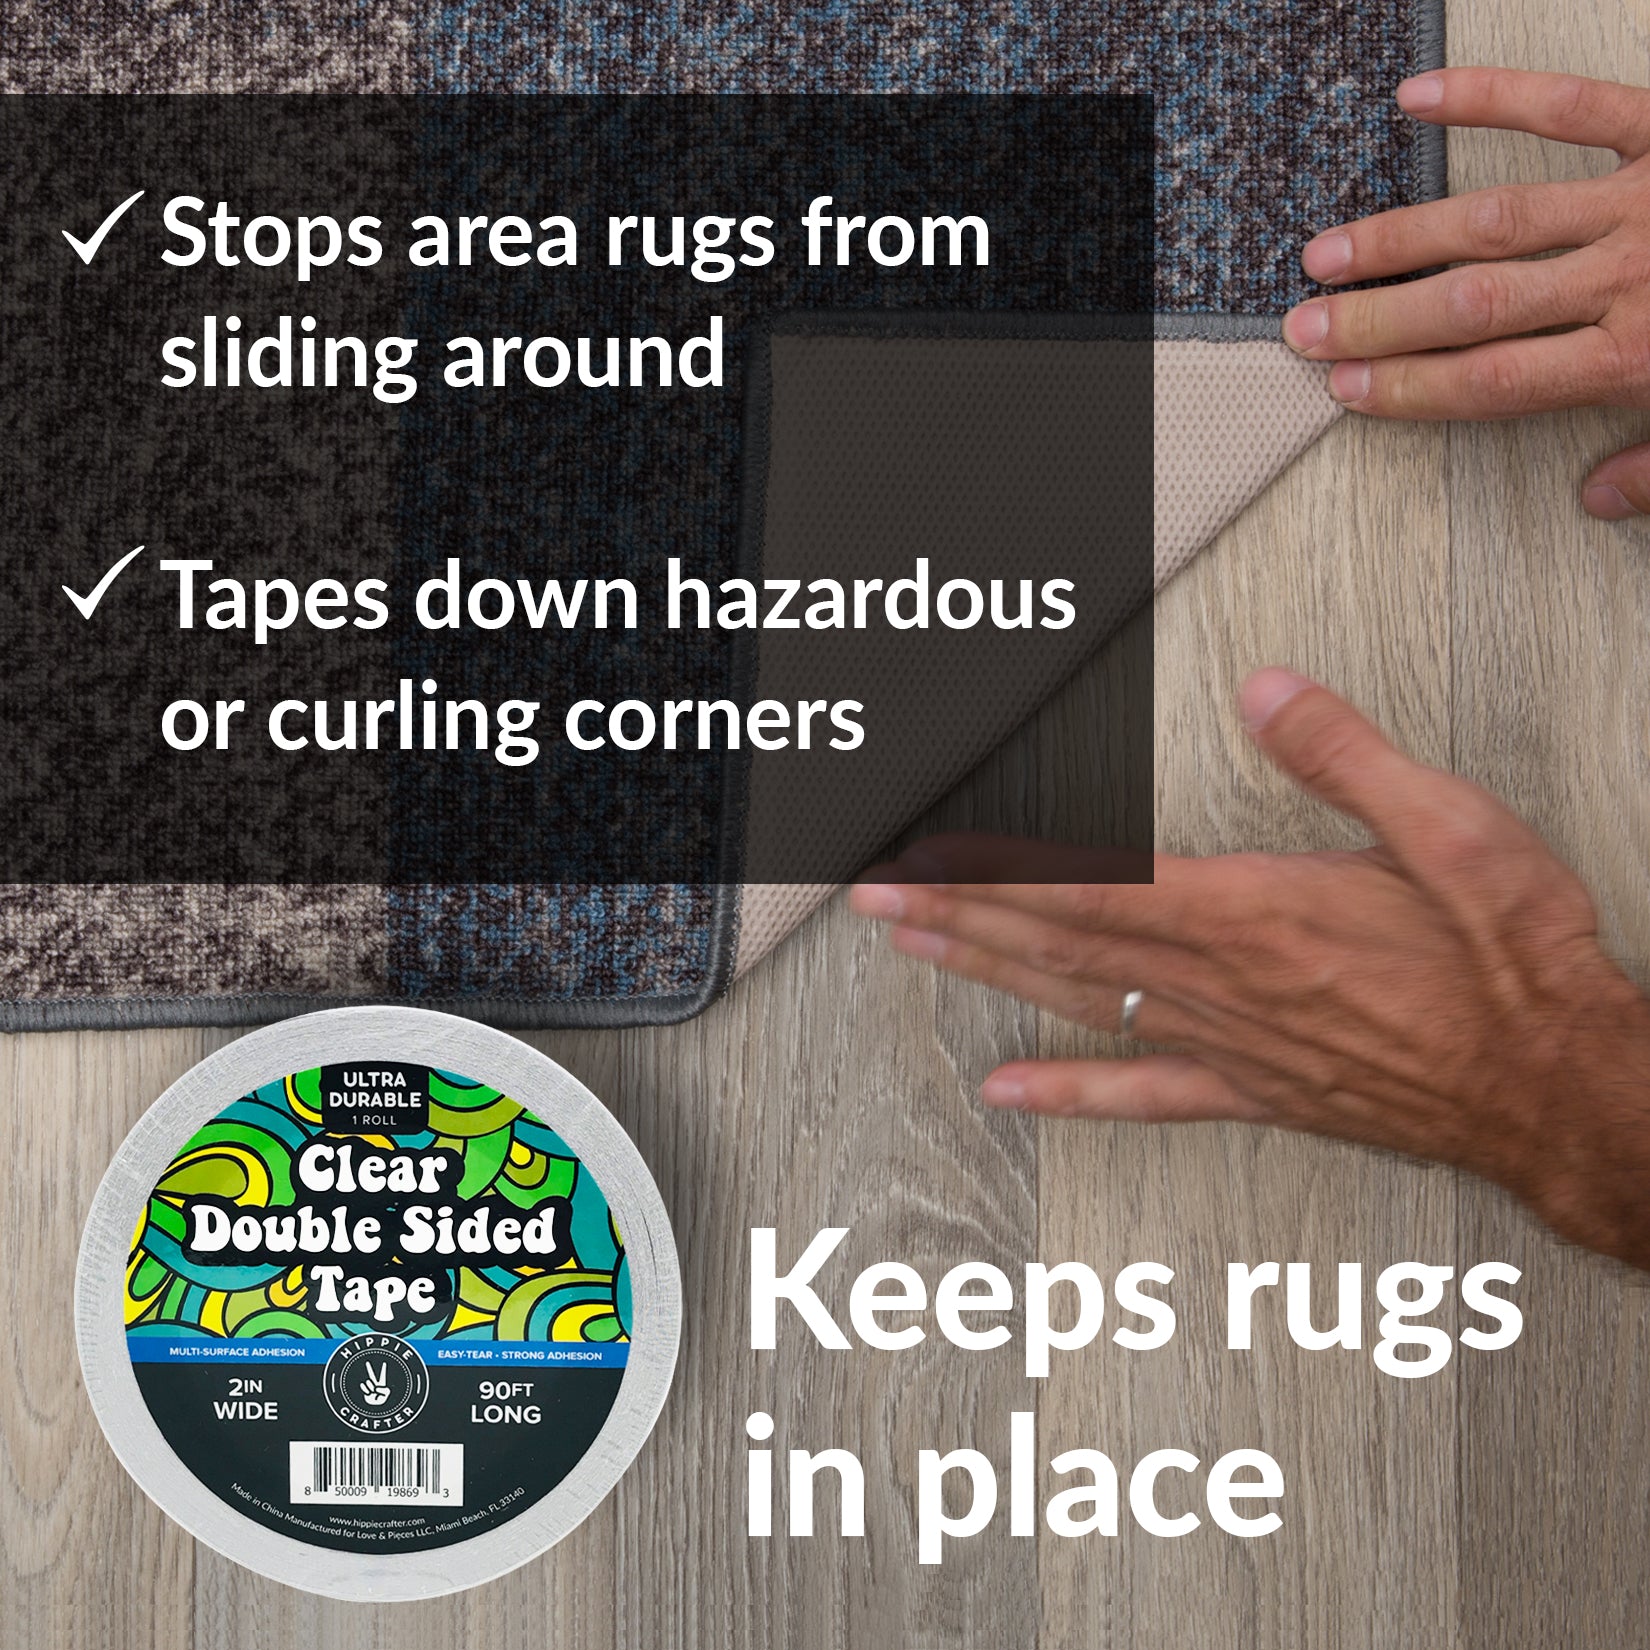 Double Sided Carpet Tape Heavy Duty for Area Rugs, Tile Floors Rug Gripper  Tape with Strong